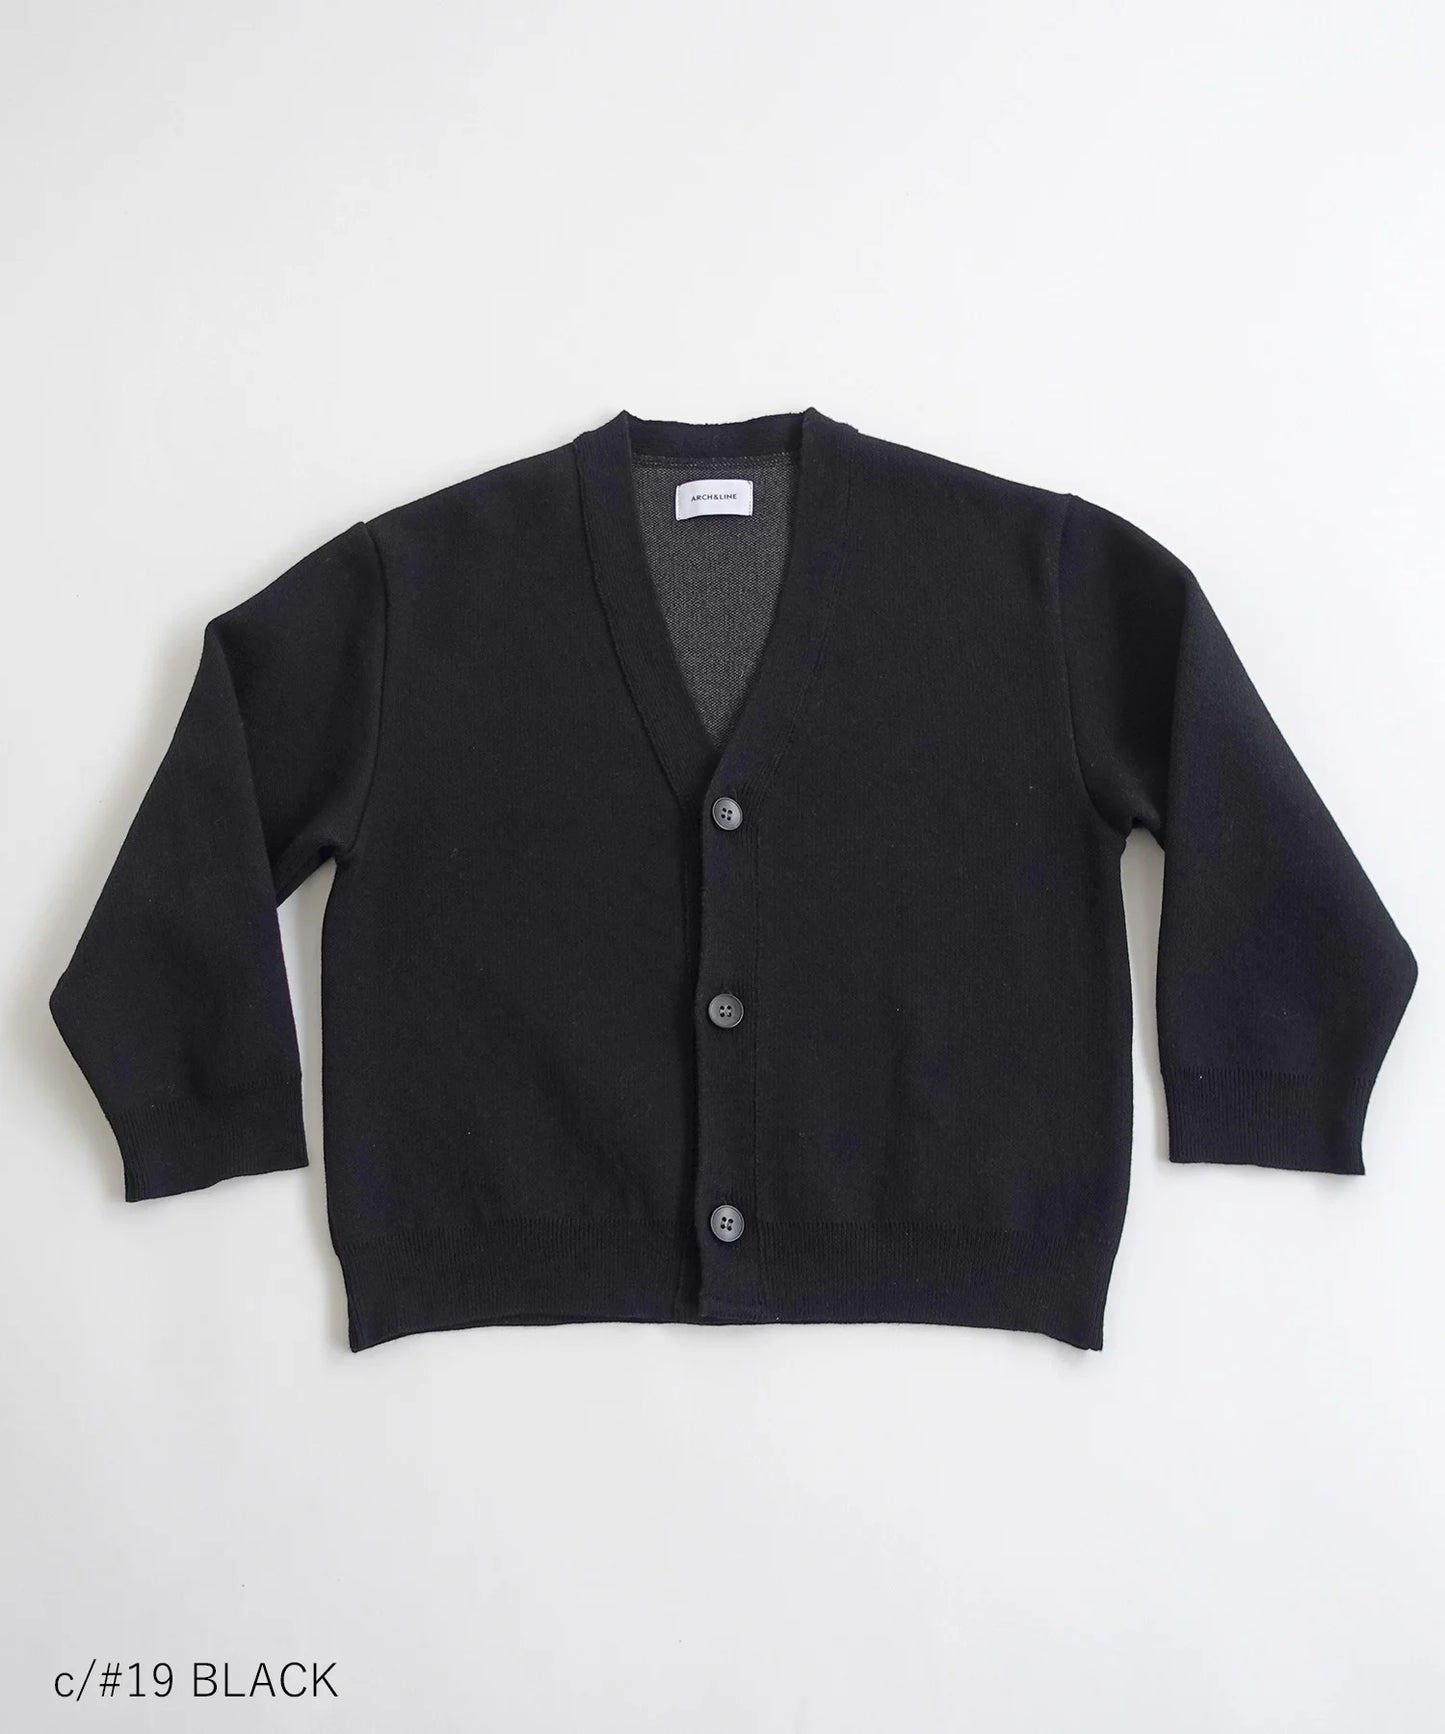 [Eco-friendly material] OG COTTON WF CARDIGAN Organic cotton For both on and off [145-175cm]